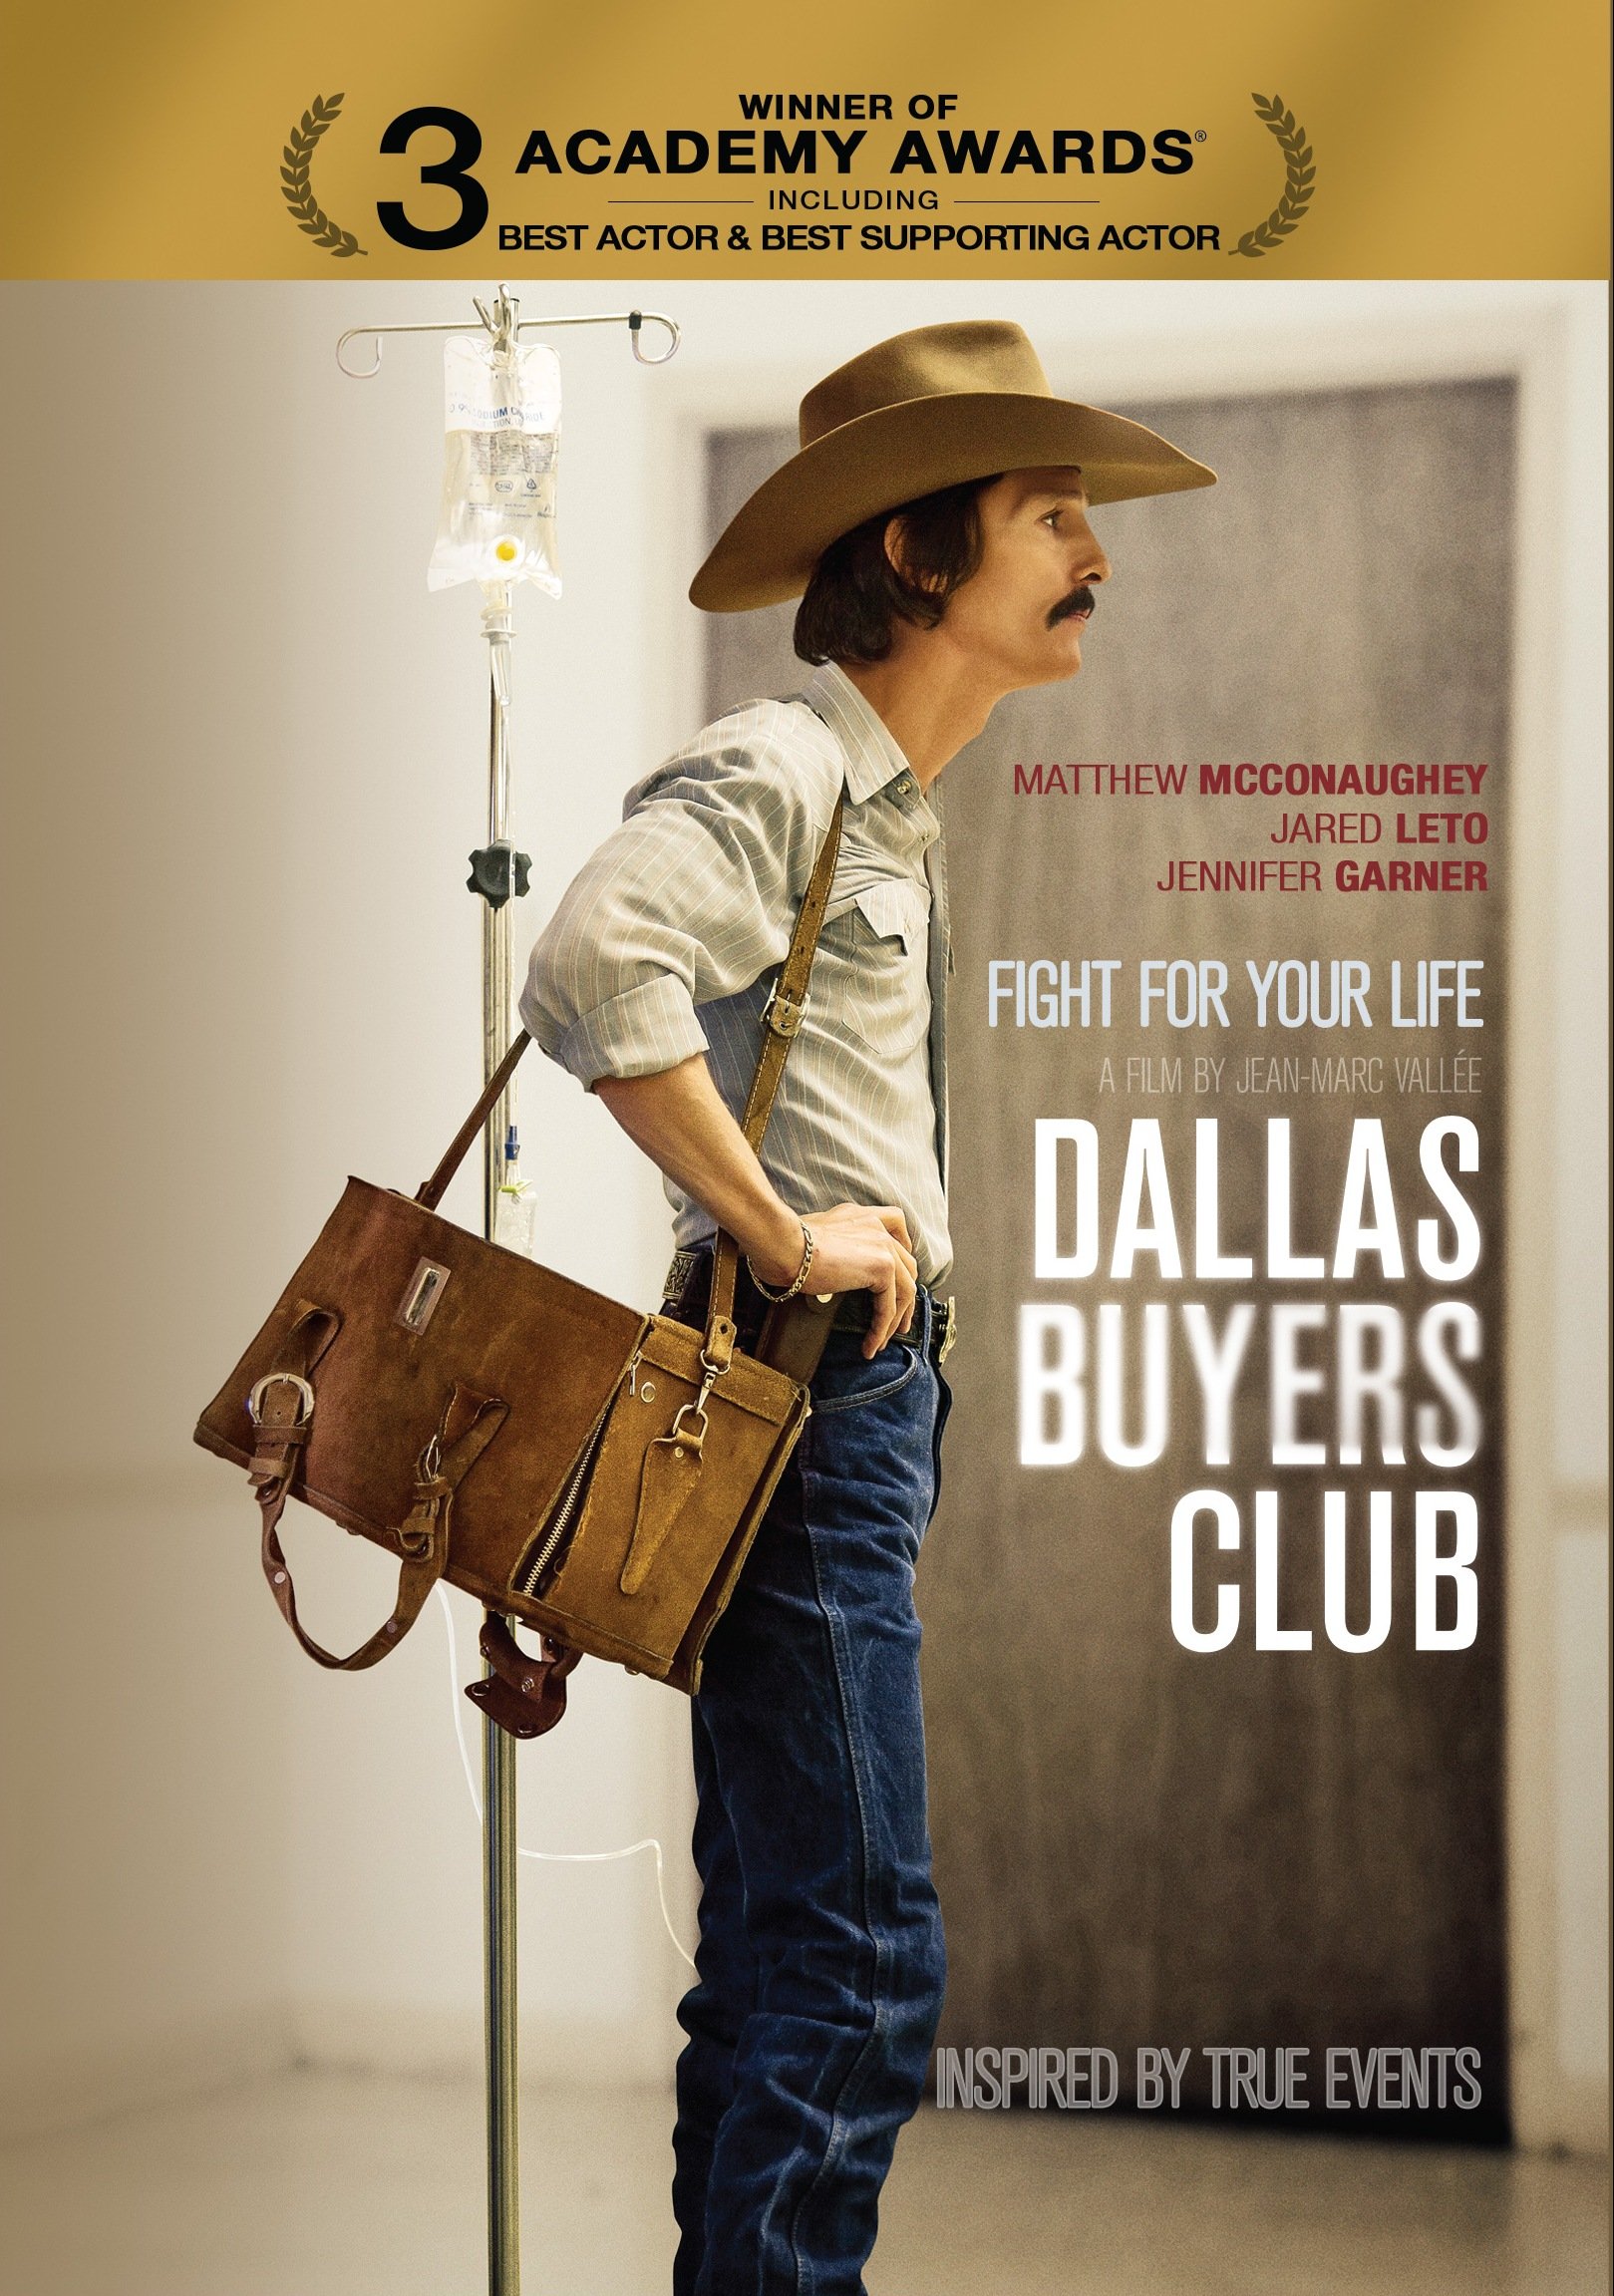 dallas-buyers-club-movie-purchase-or-watch-online